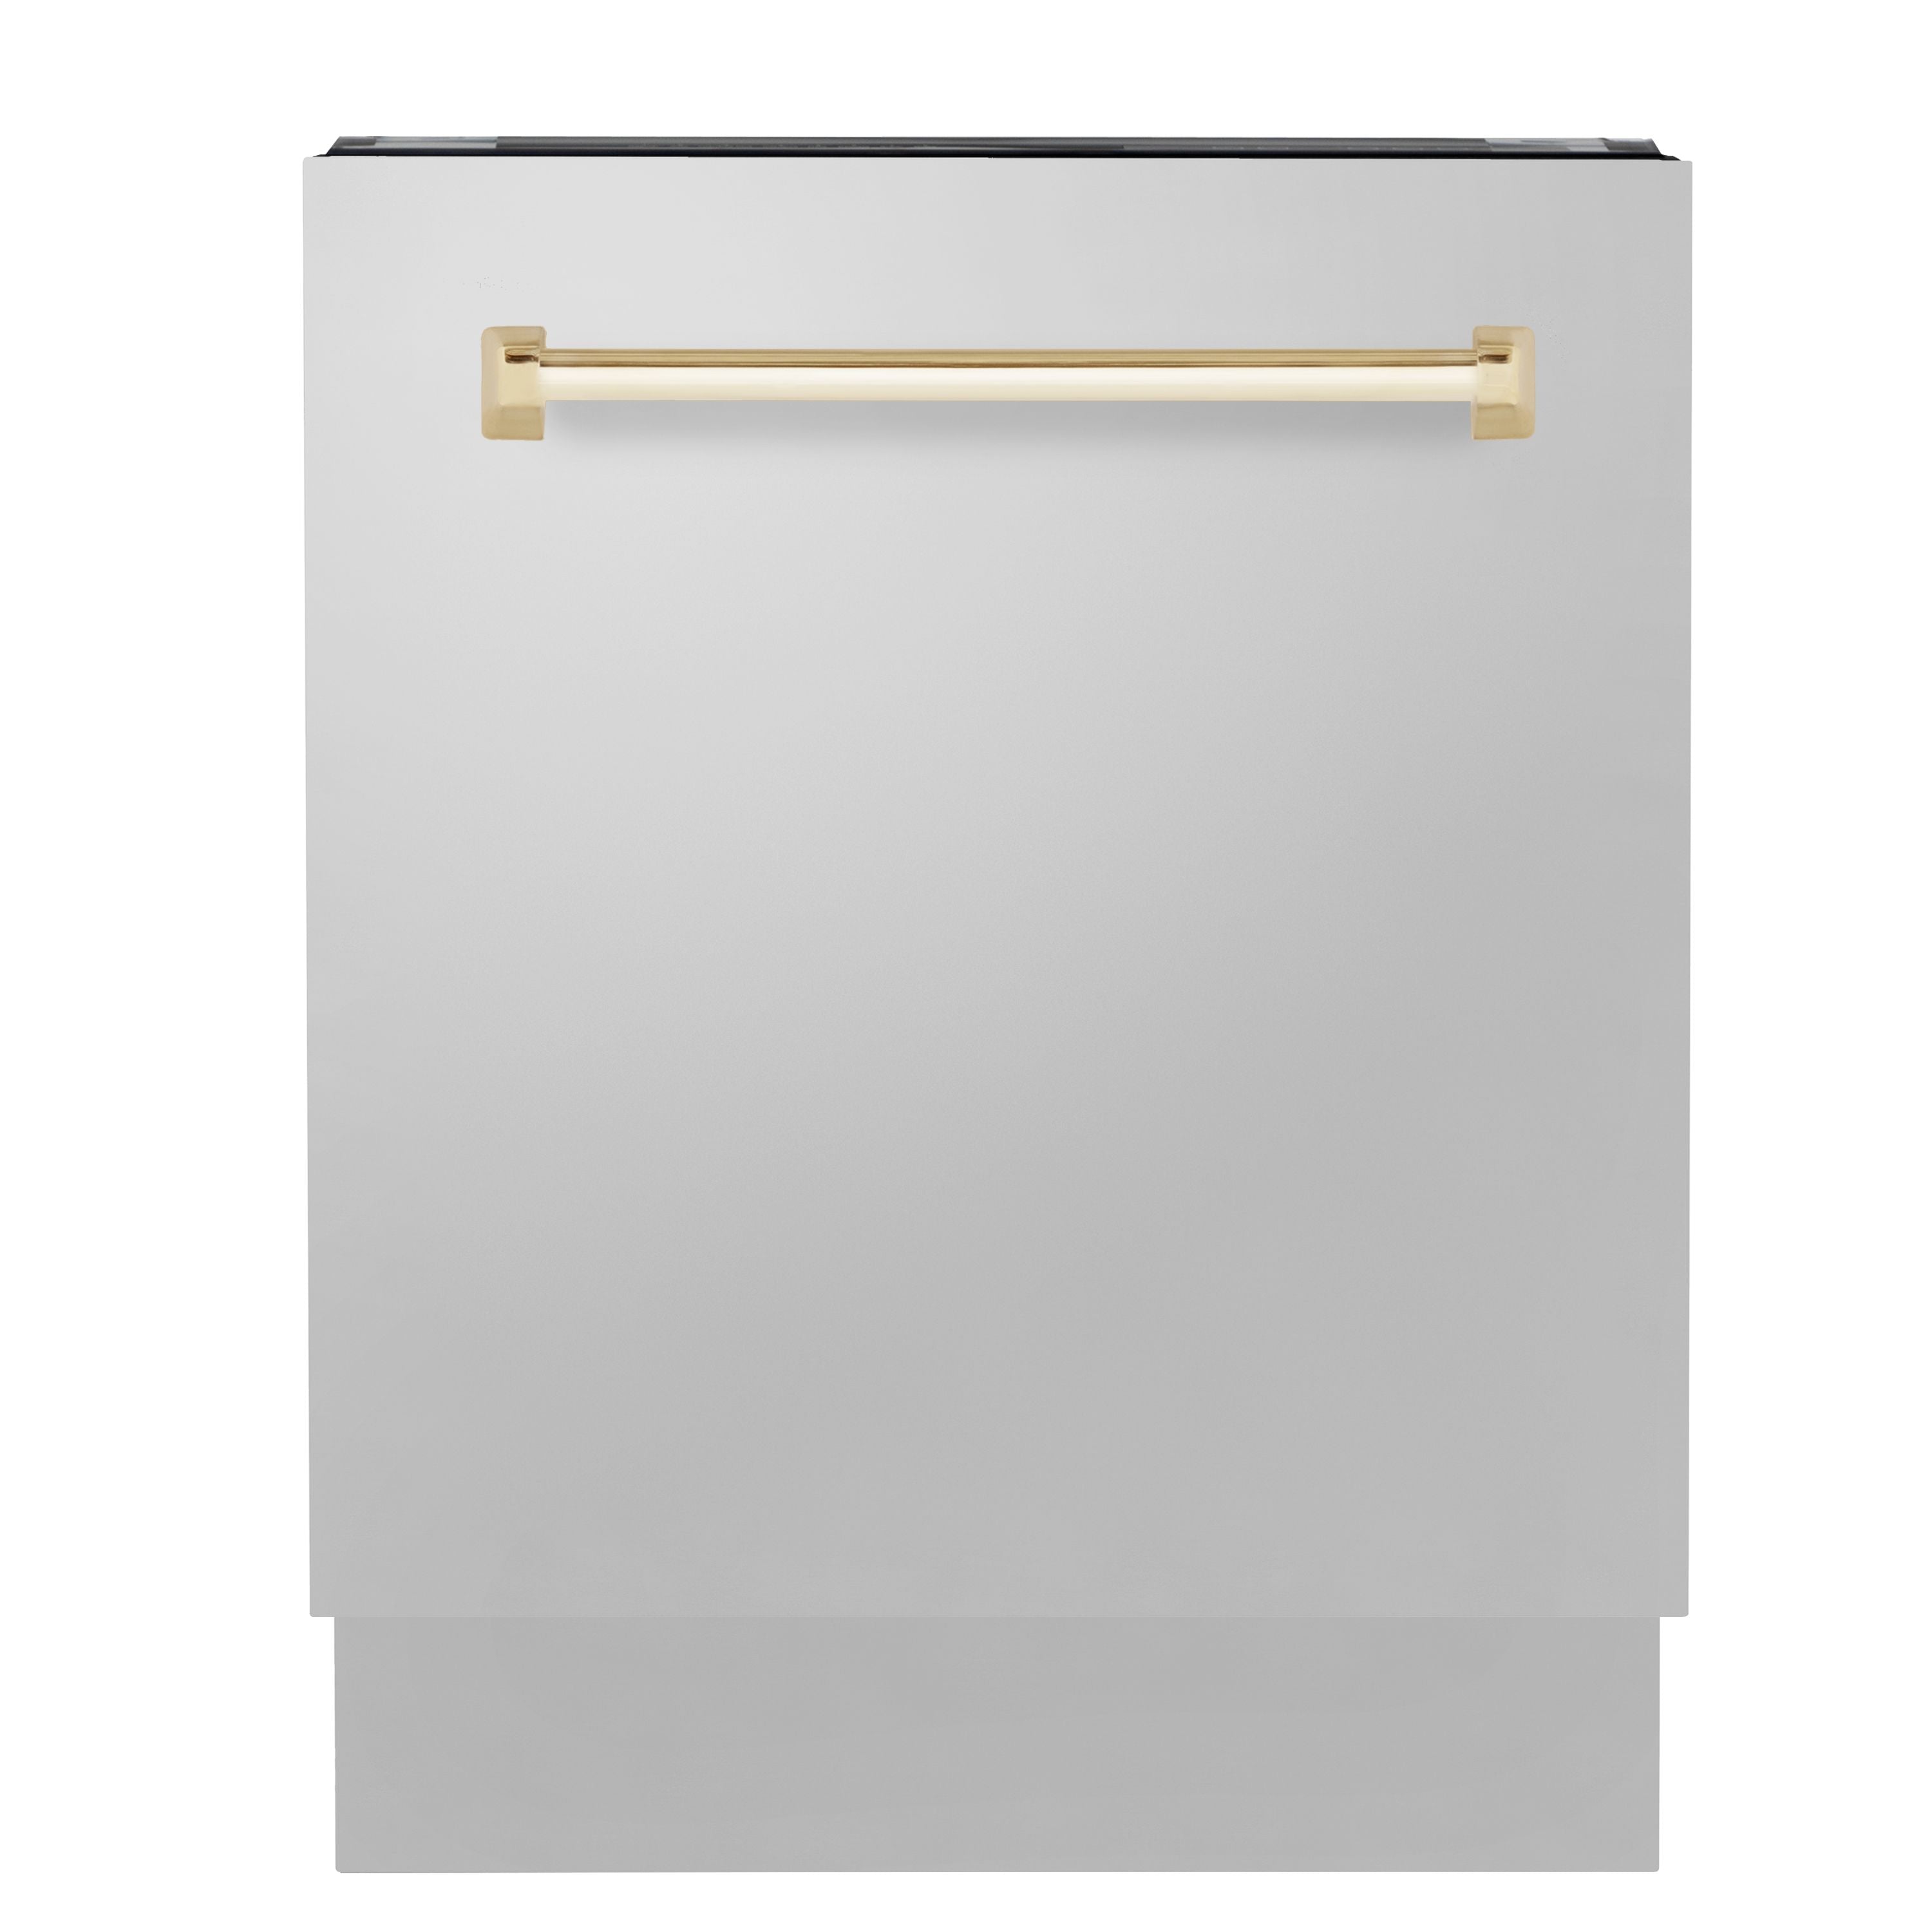 ZLINE Autograph Series 24 inch Tall Dishwasher in Stainless Steel with Gold Handle